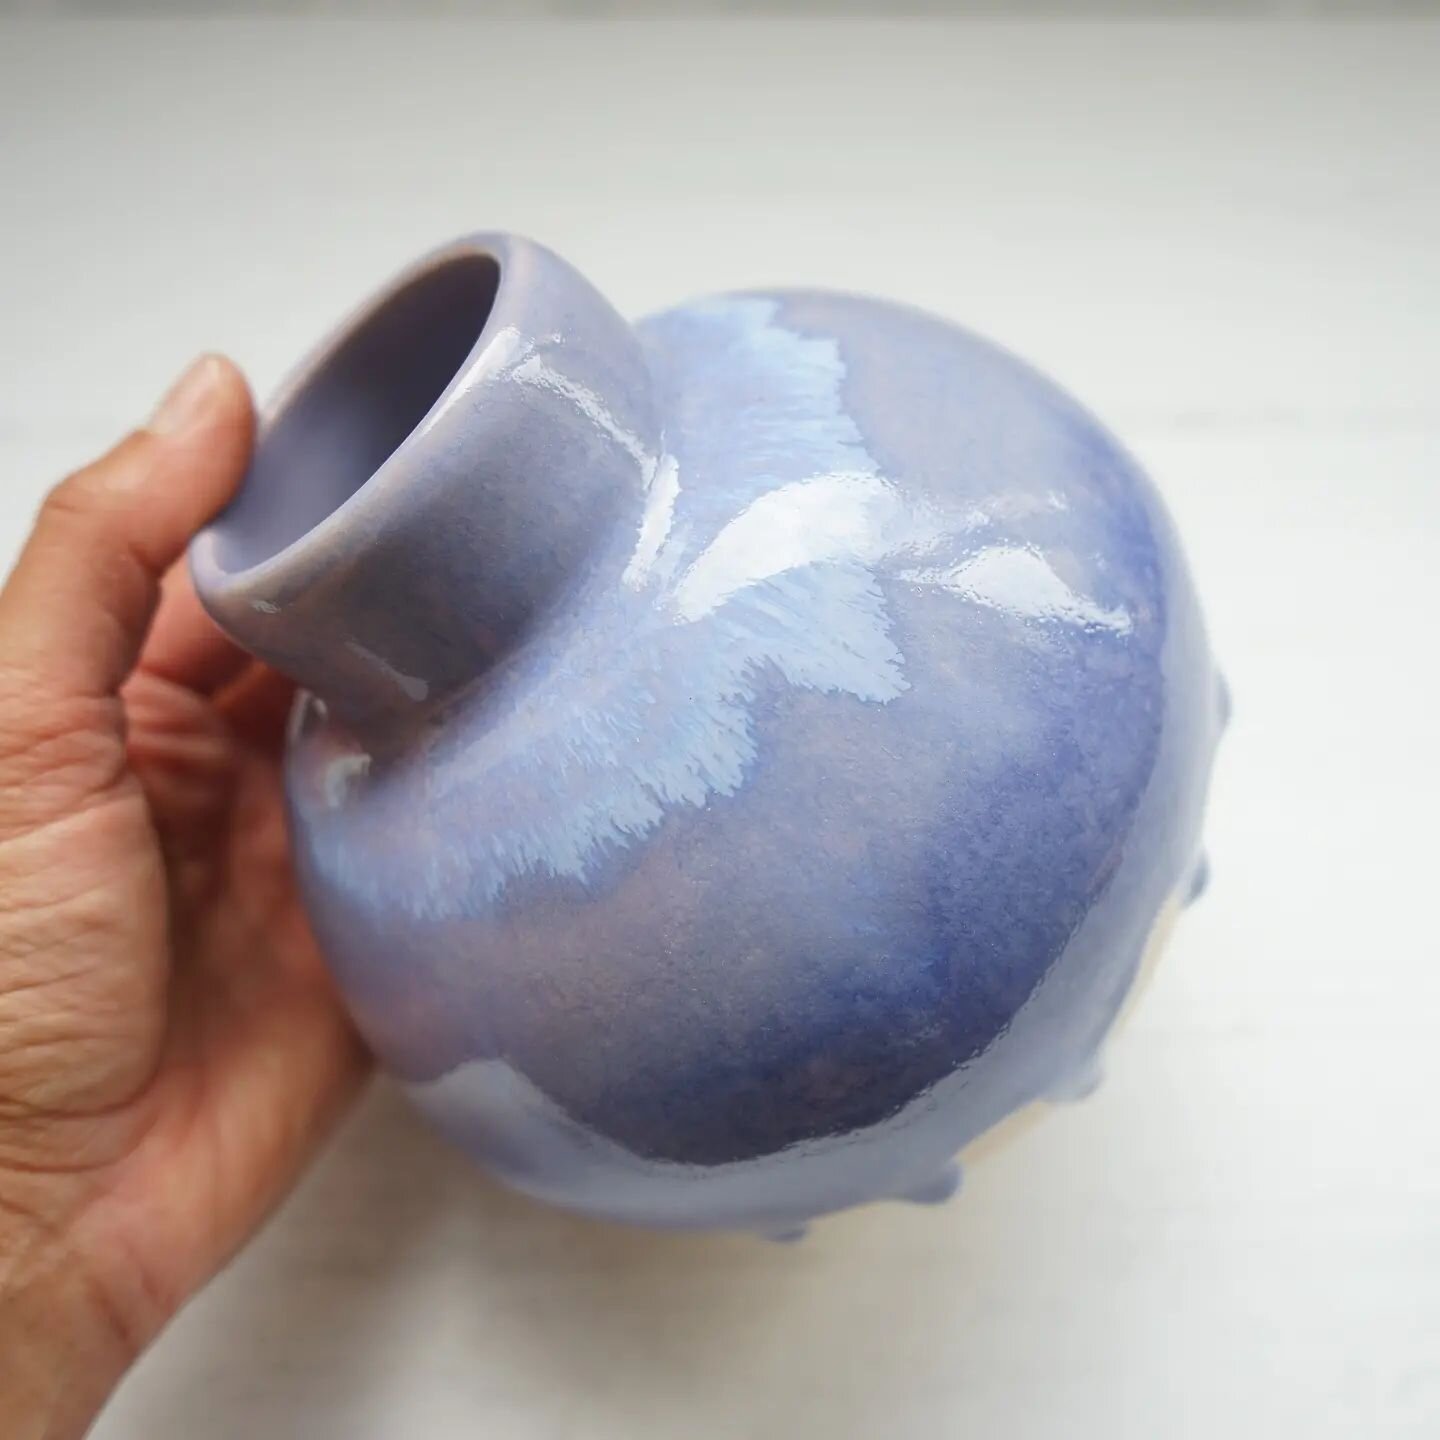 This is a vase I first glazed a little while ago (it's on the grid in a video a few posts back) that needed some adjusting to the glaze. After re-firing it at a slightly higher temperature in my smaller kiln this glaze turned out even better than I'd